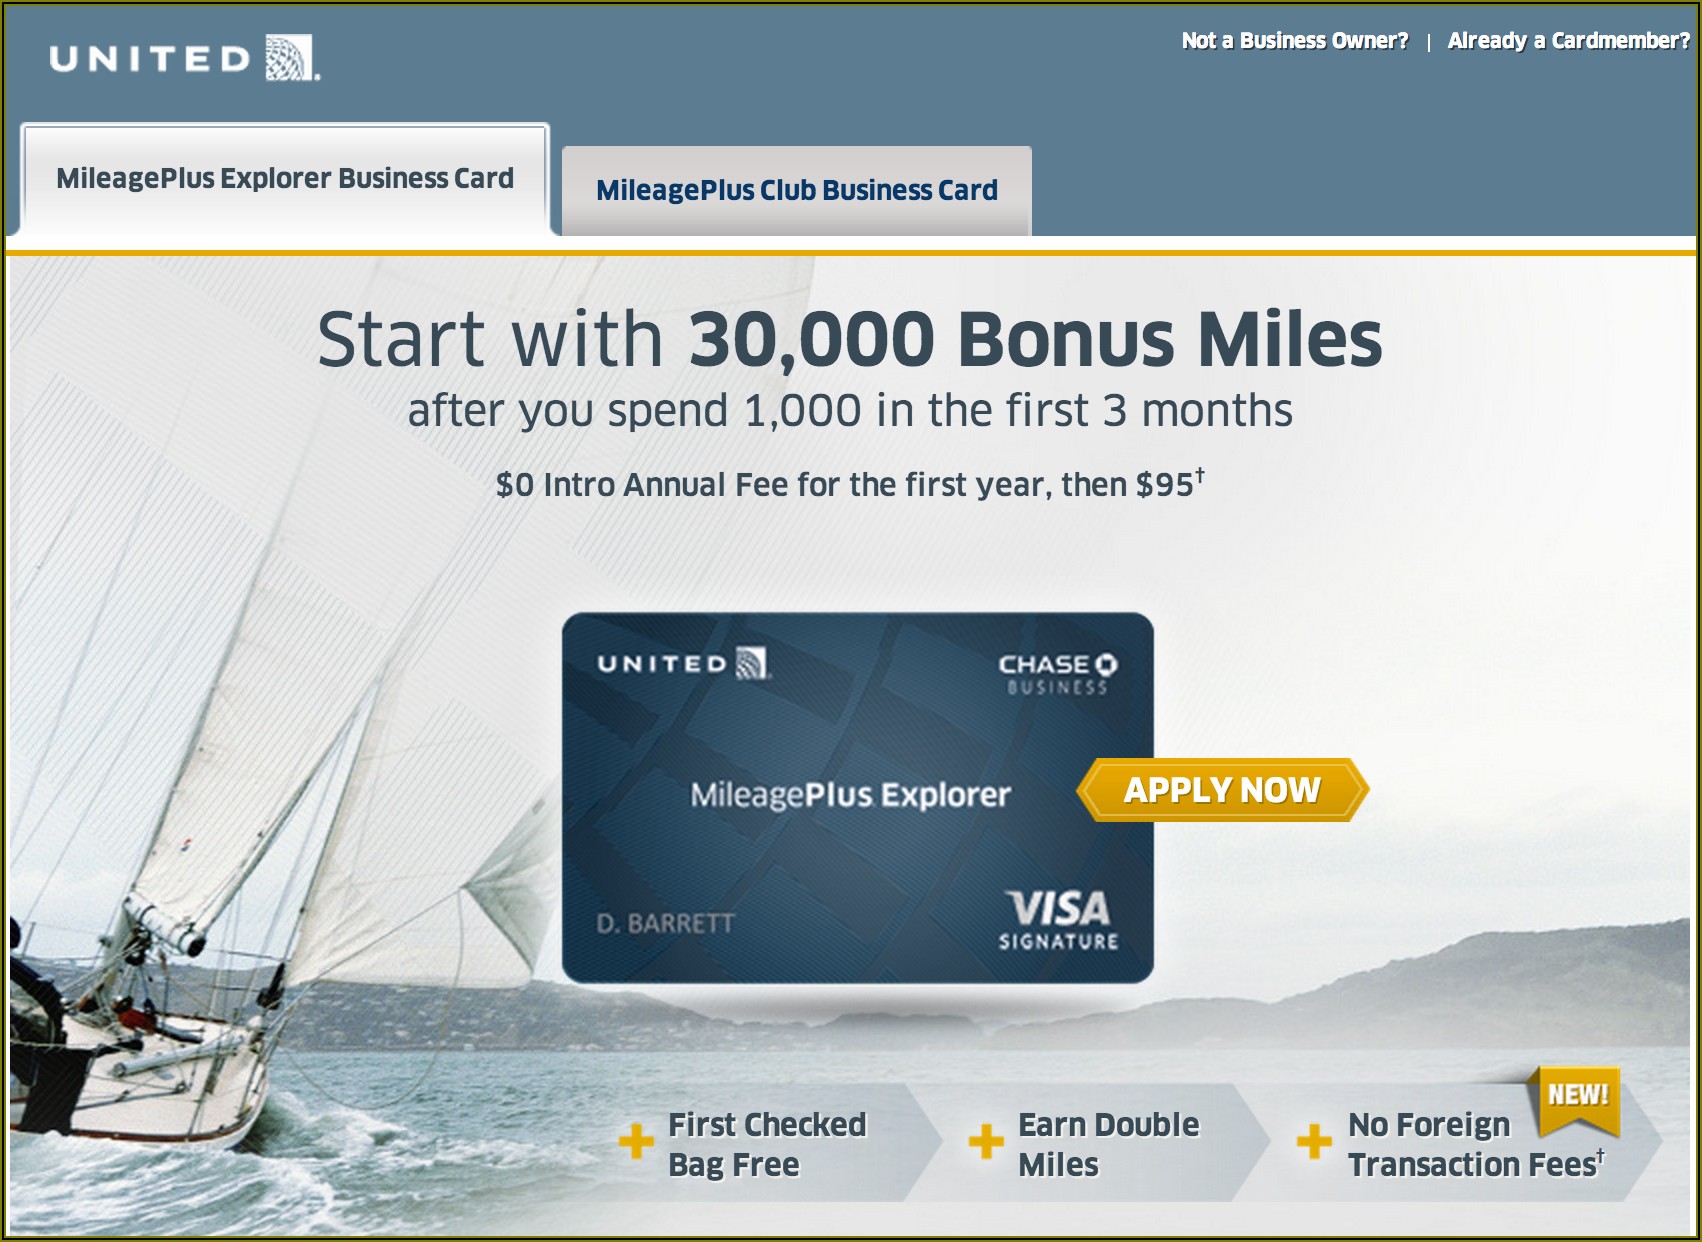 chase united mileageplus customer service phone number